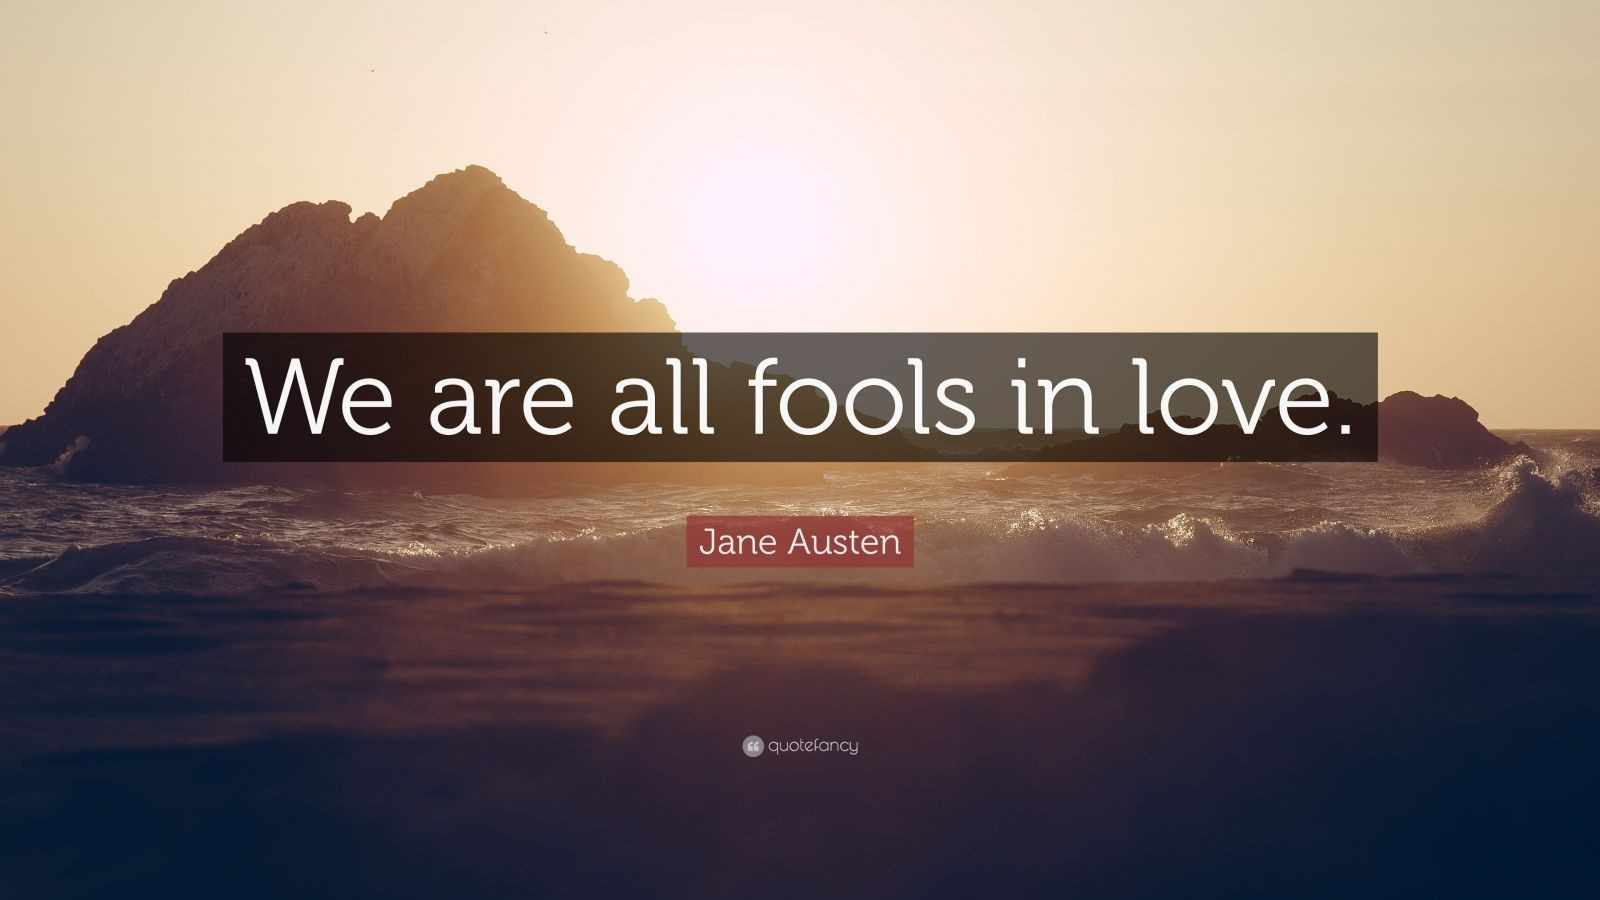 Jane Austen Quotes On Love
 Jane Austen Quote “We are all fools in love ” 14